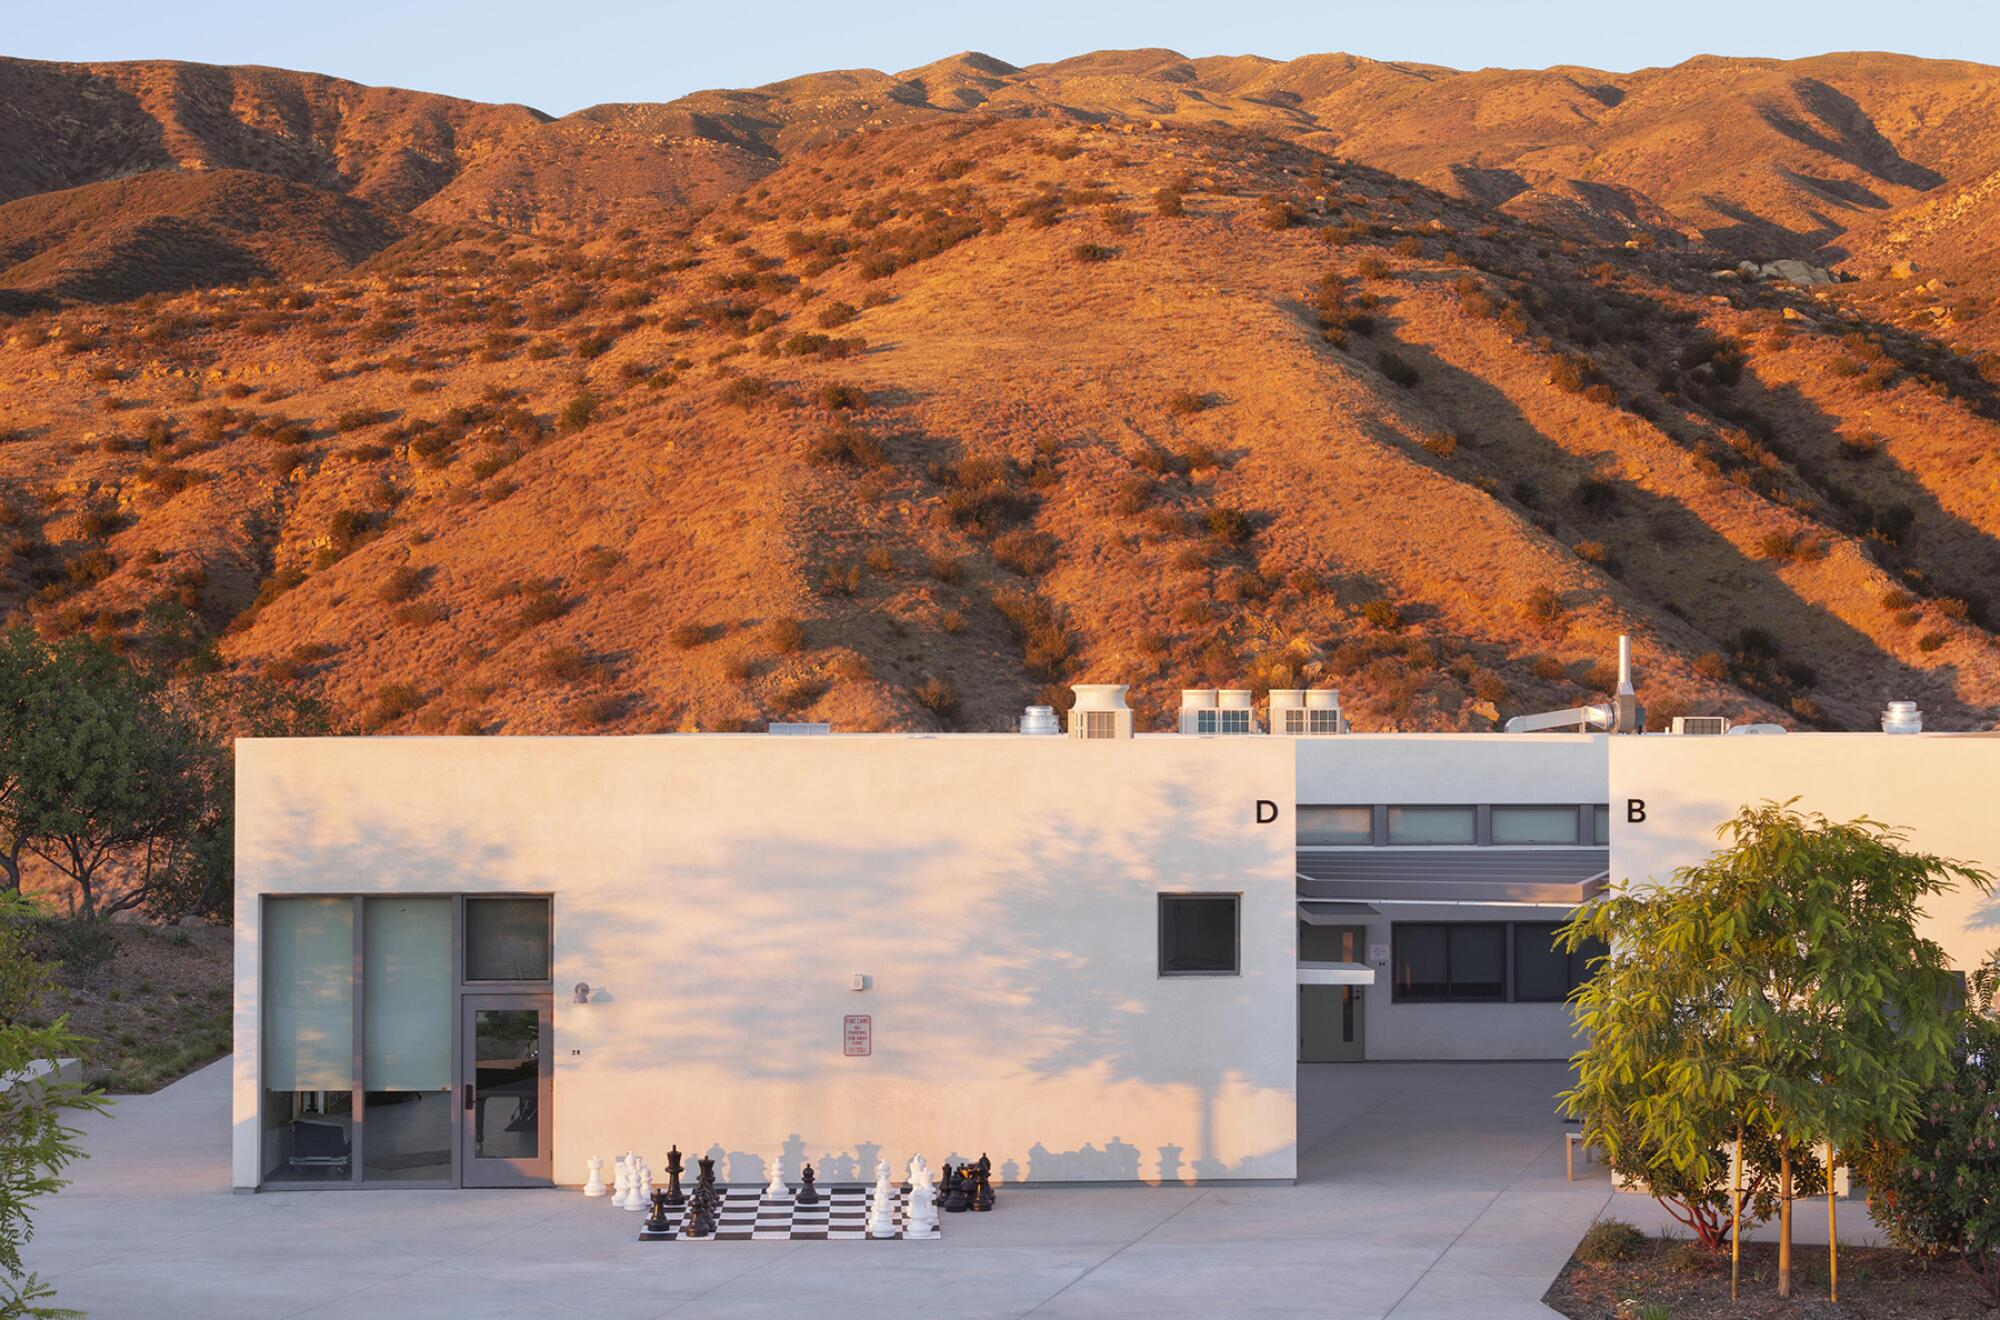 A minimalist white building with a giant chessboard in front sits before a large hilltop covered in Mediterranean scrub.